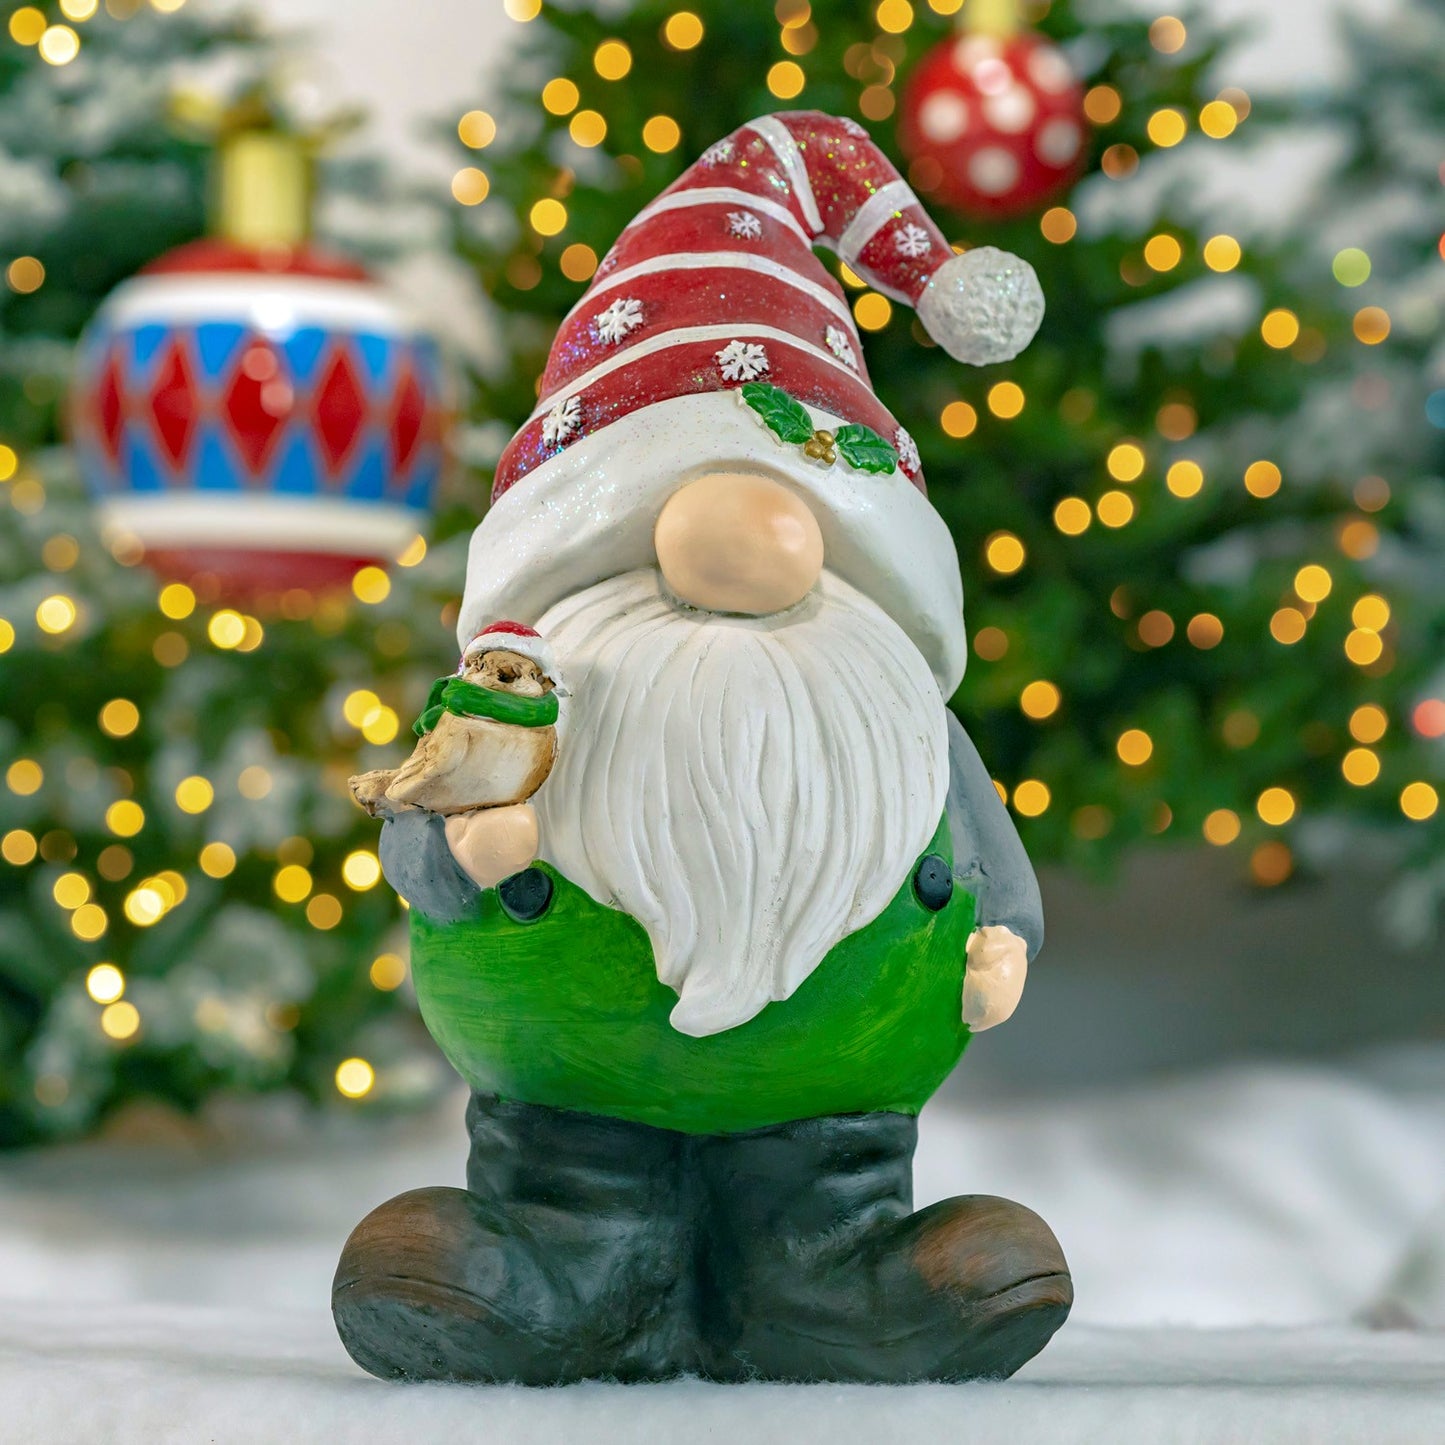 The Goodfellows Set of 6 Assorted Christmas Garden Gnomes